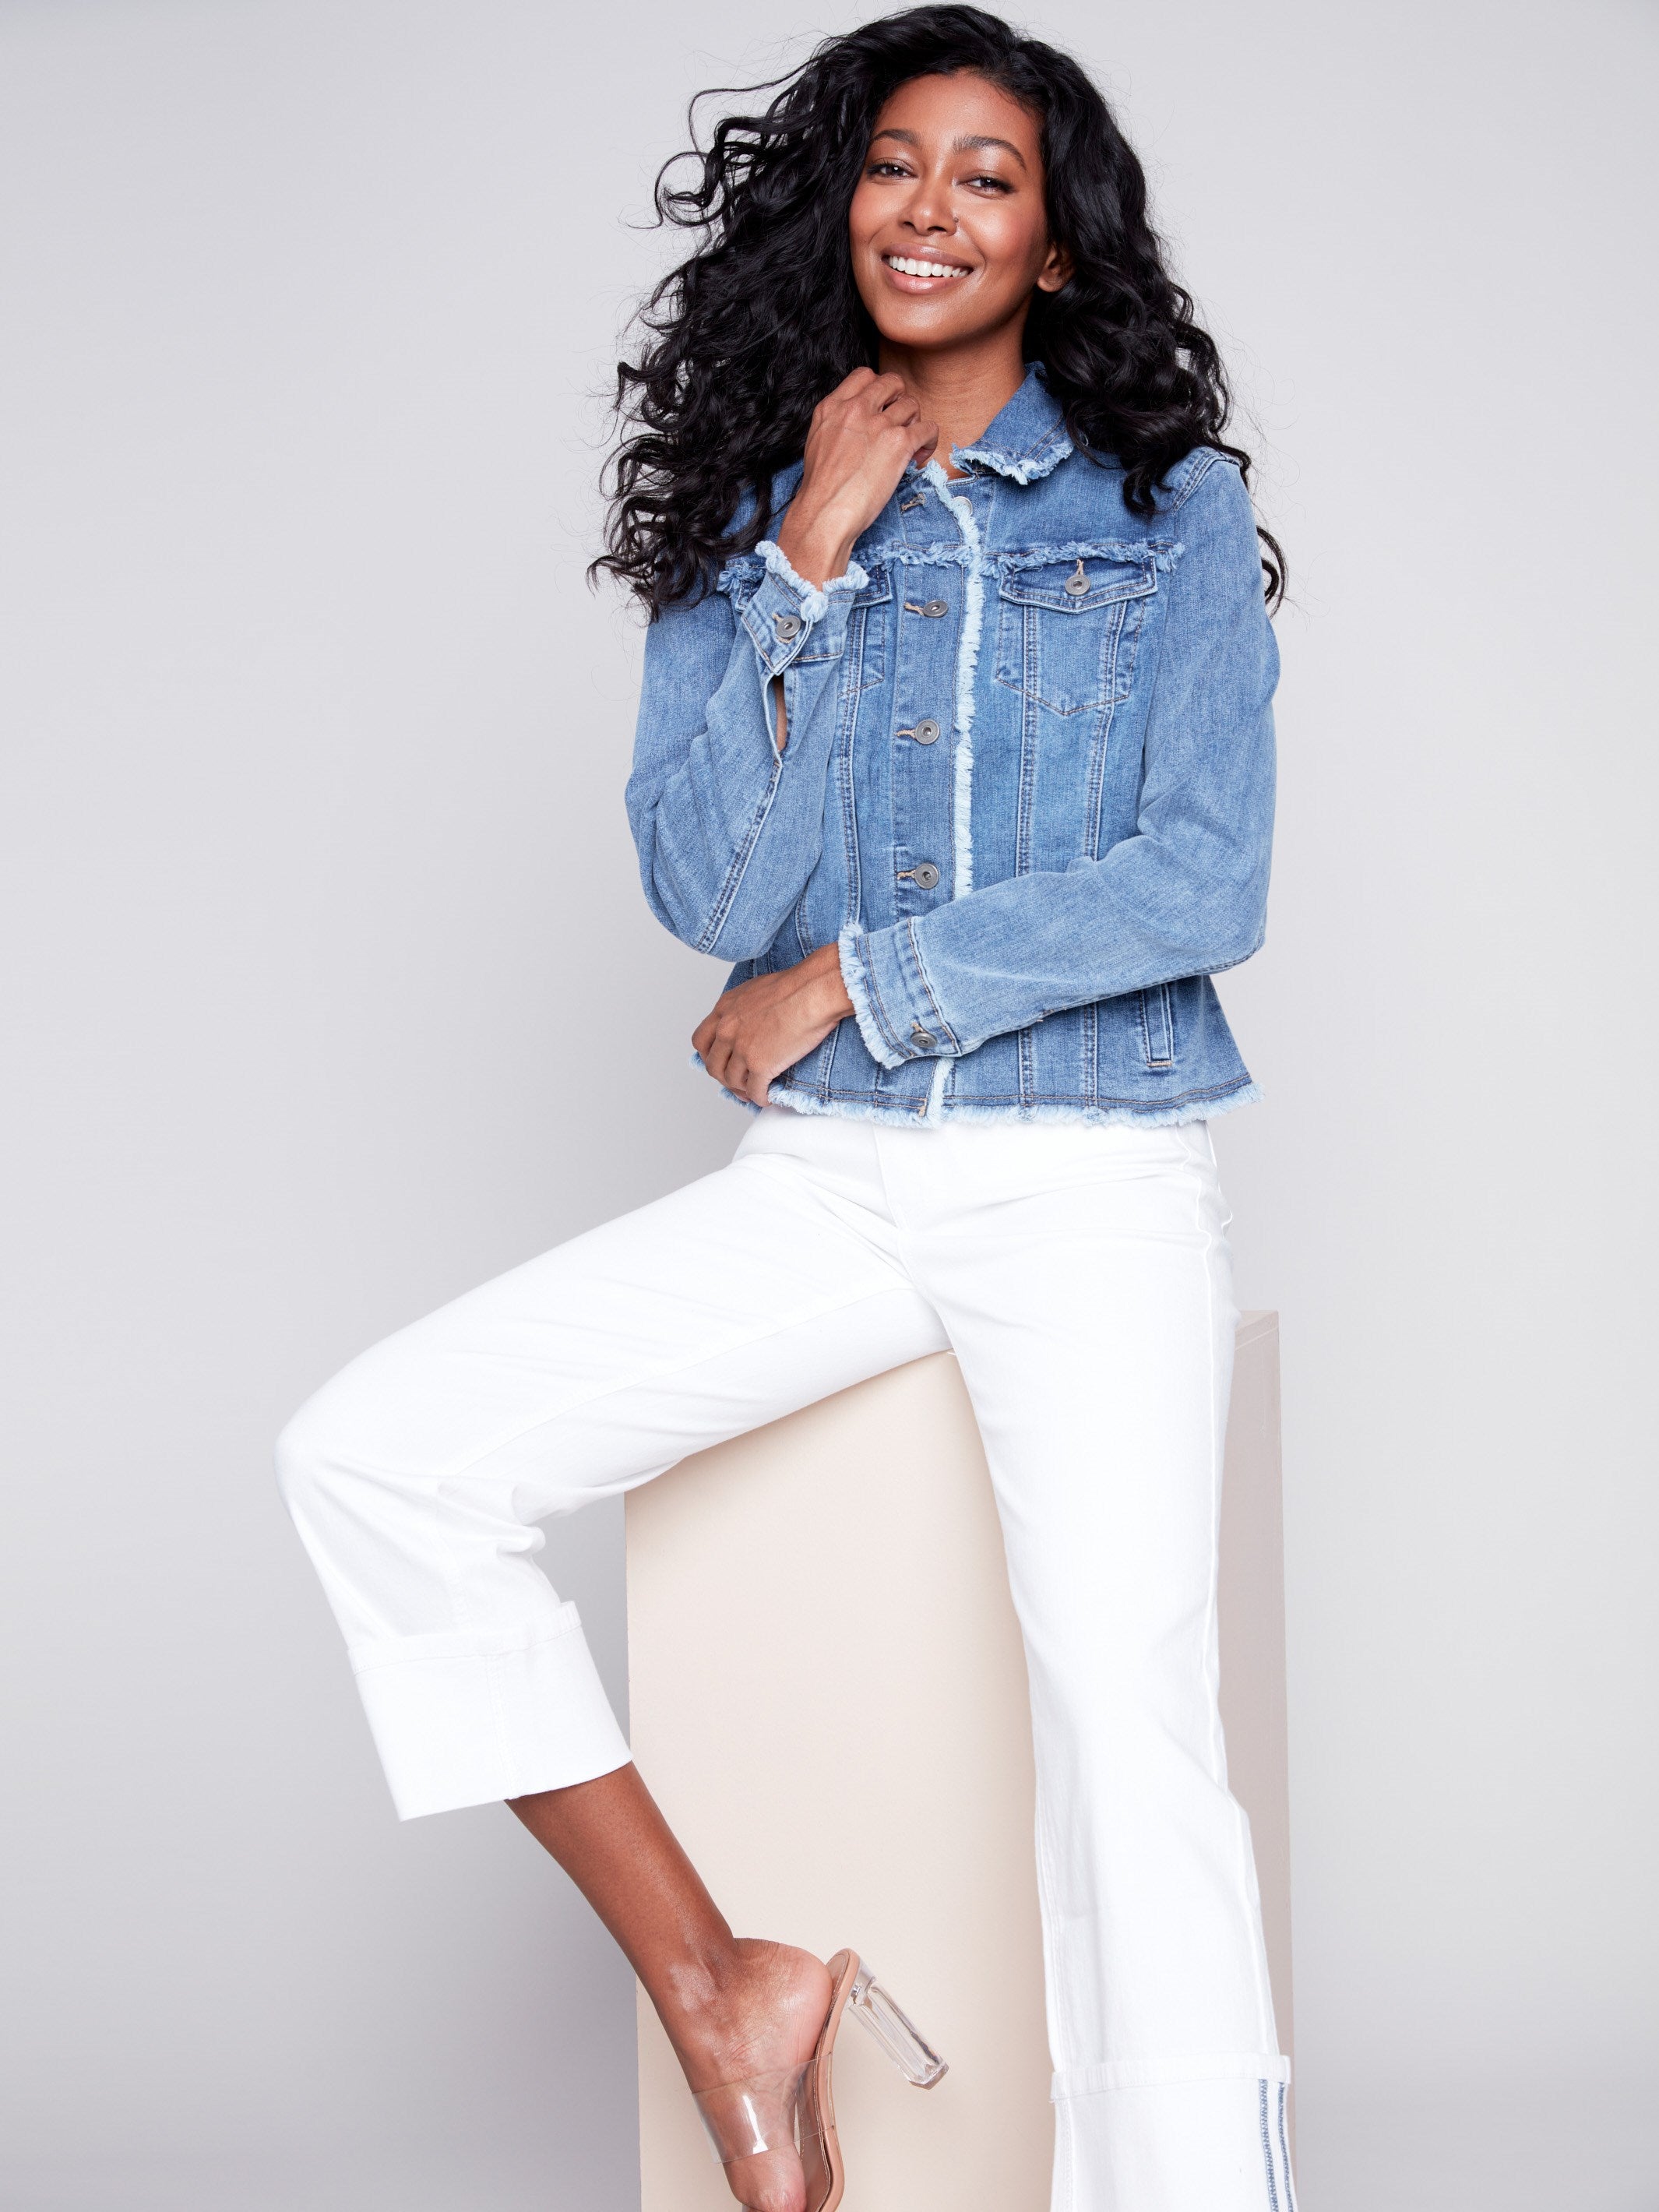 Jean Jacket with Frayed Edges - Medium Blue - Charlie B Collection Canada - Image 2